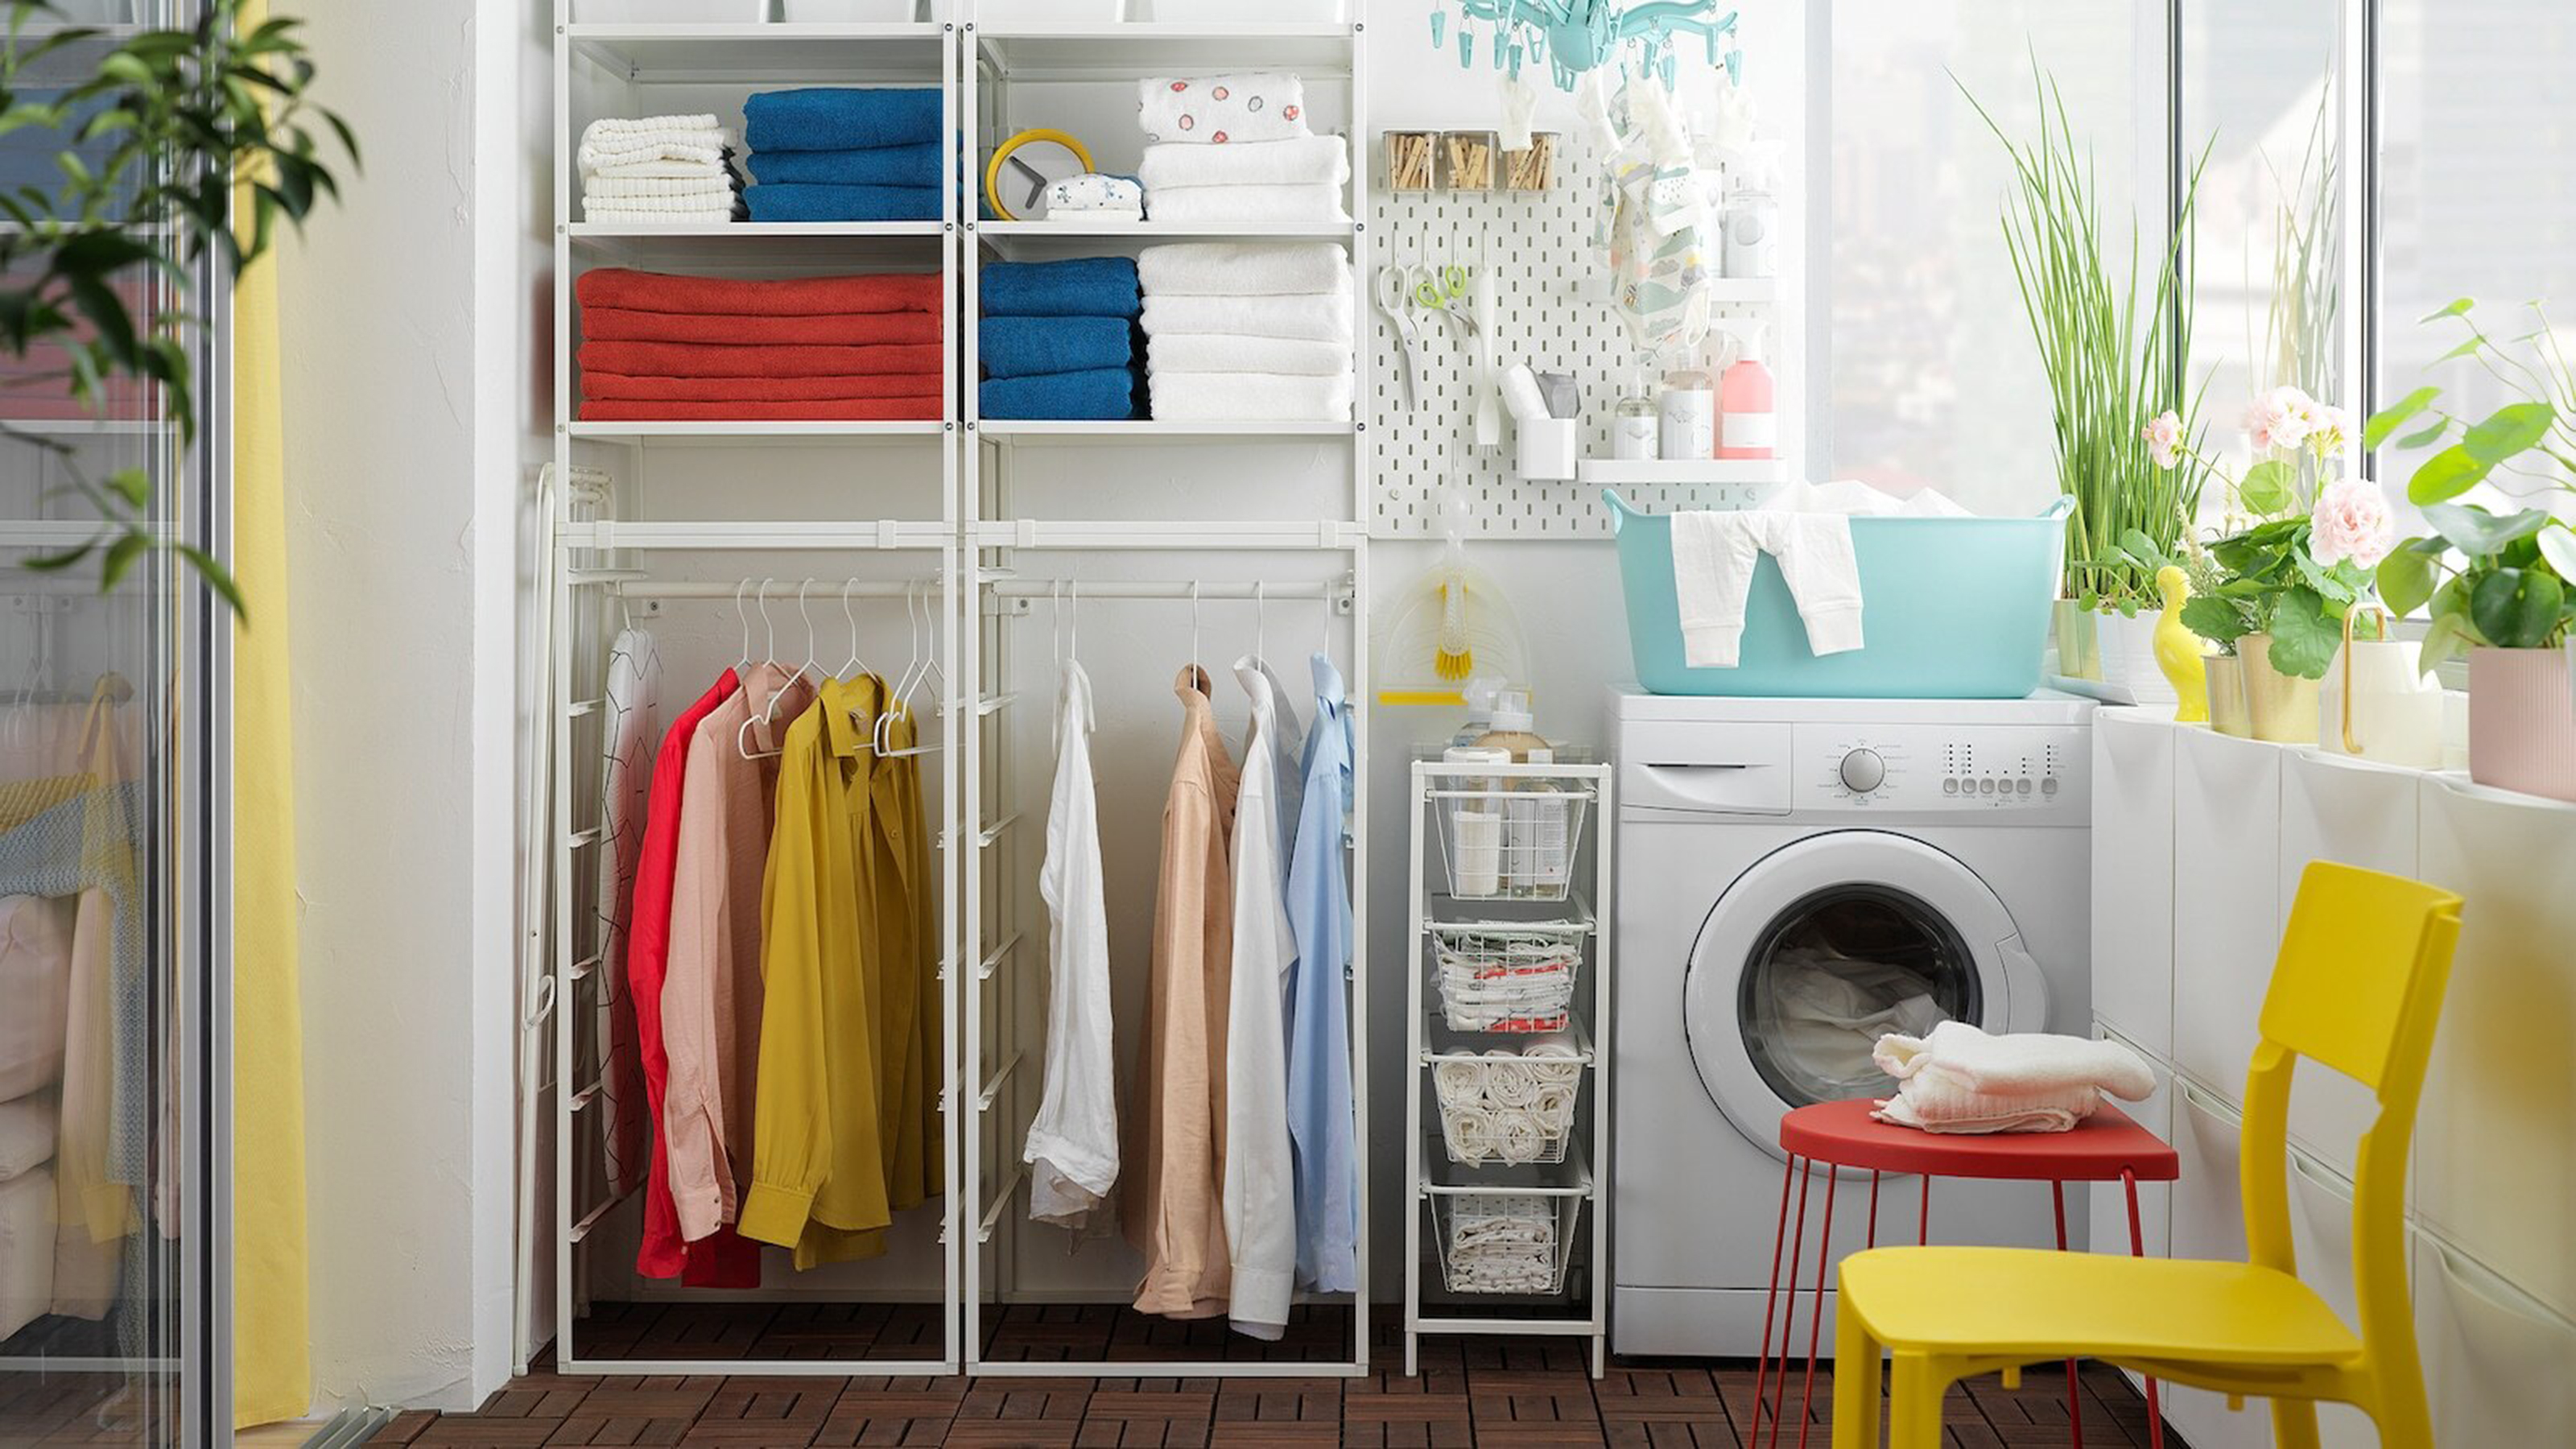 19 Laundry Room Shelving Ideas Real Homes, Free Standing Wire Shelving For Over Washer And Dryer